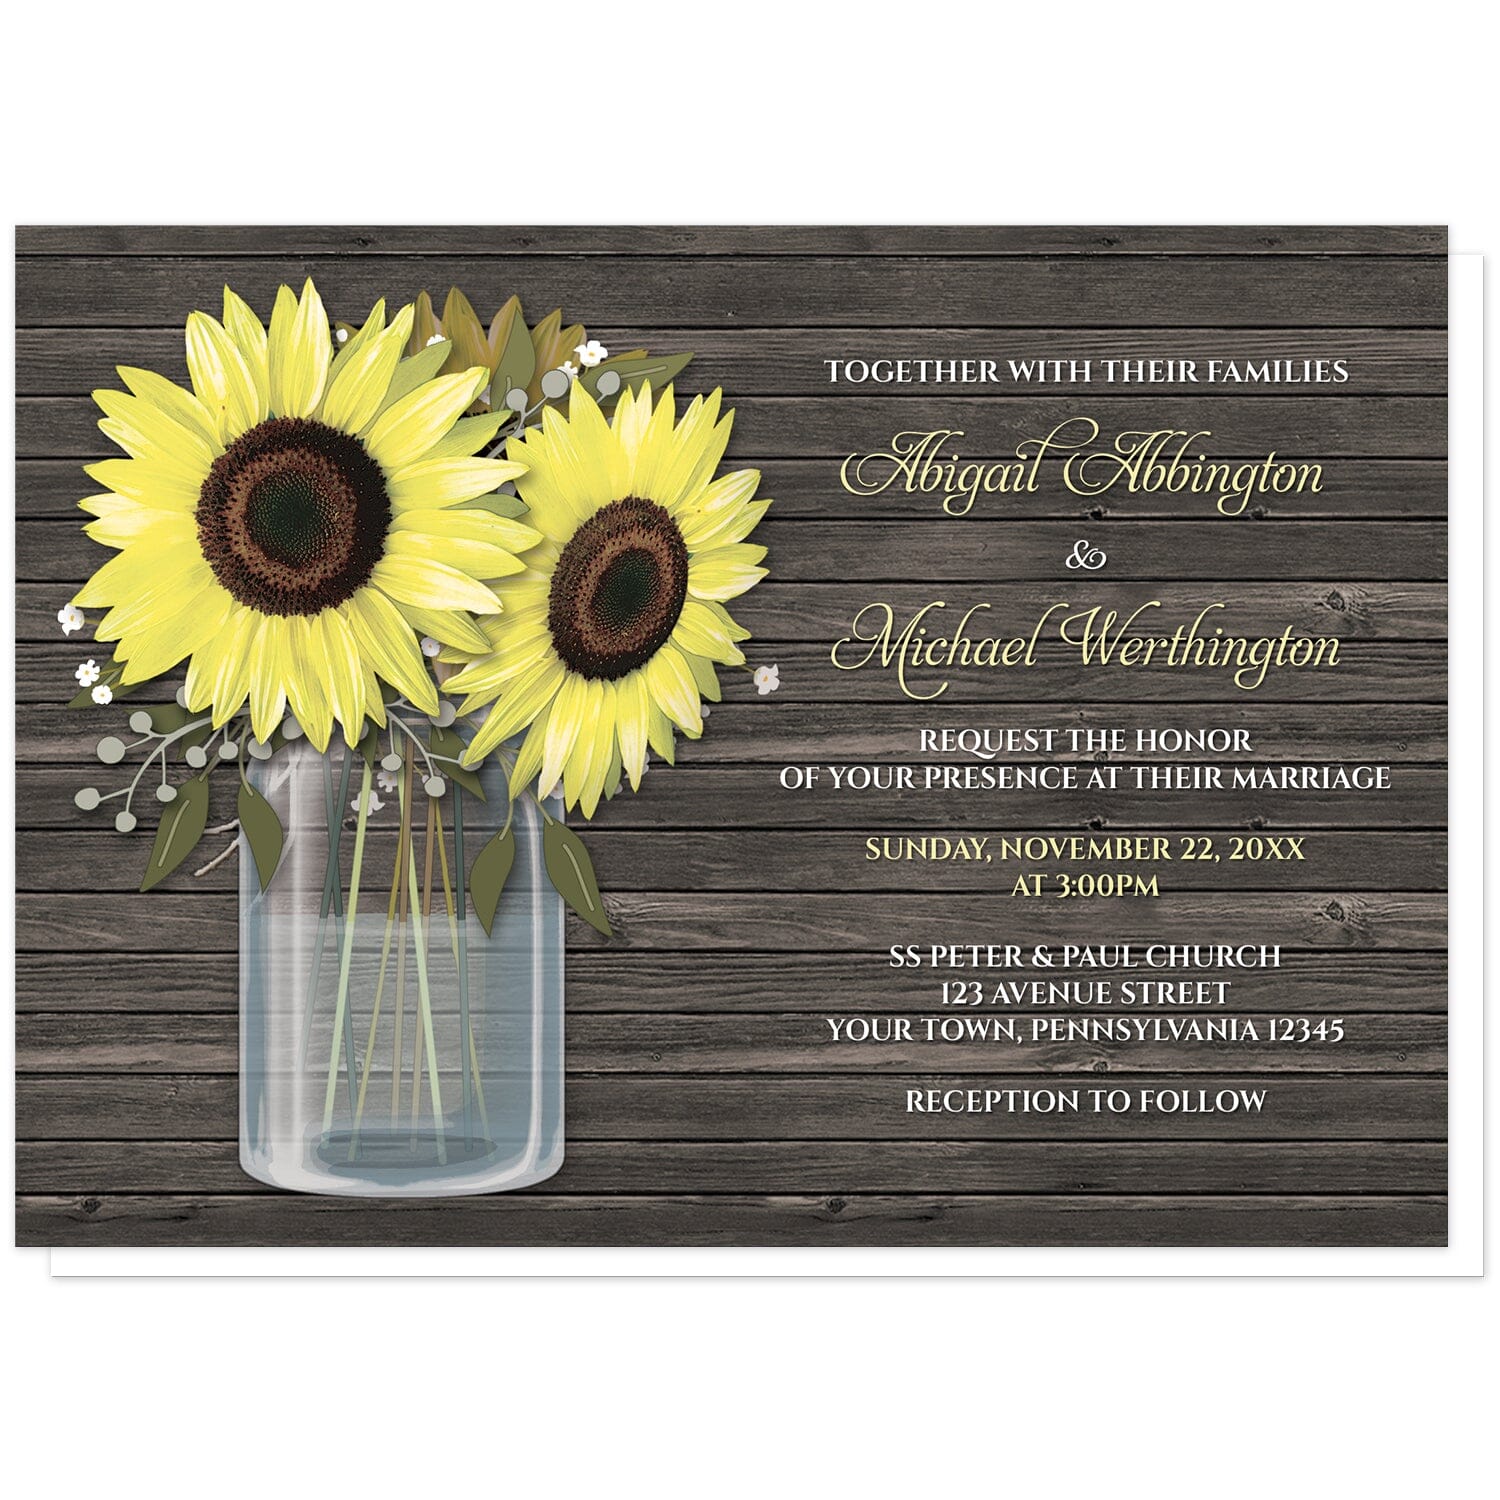 Rustic Sunflower Wood Mason Jar Wedding Invitations at Artistically Invited. Southern country-inspired rustic sunflower wood mason jar wedding invitations with big yellow sunflowers, small accents of baby's breath, and green leaves in a glass mason jar illustration. Your personalized marriage celebration details are custom printed in yellow and white to the right of the sunflowers and mason jar design over a dark brown wood background.